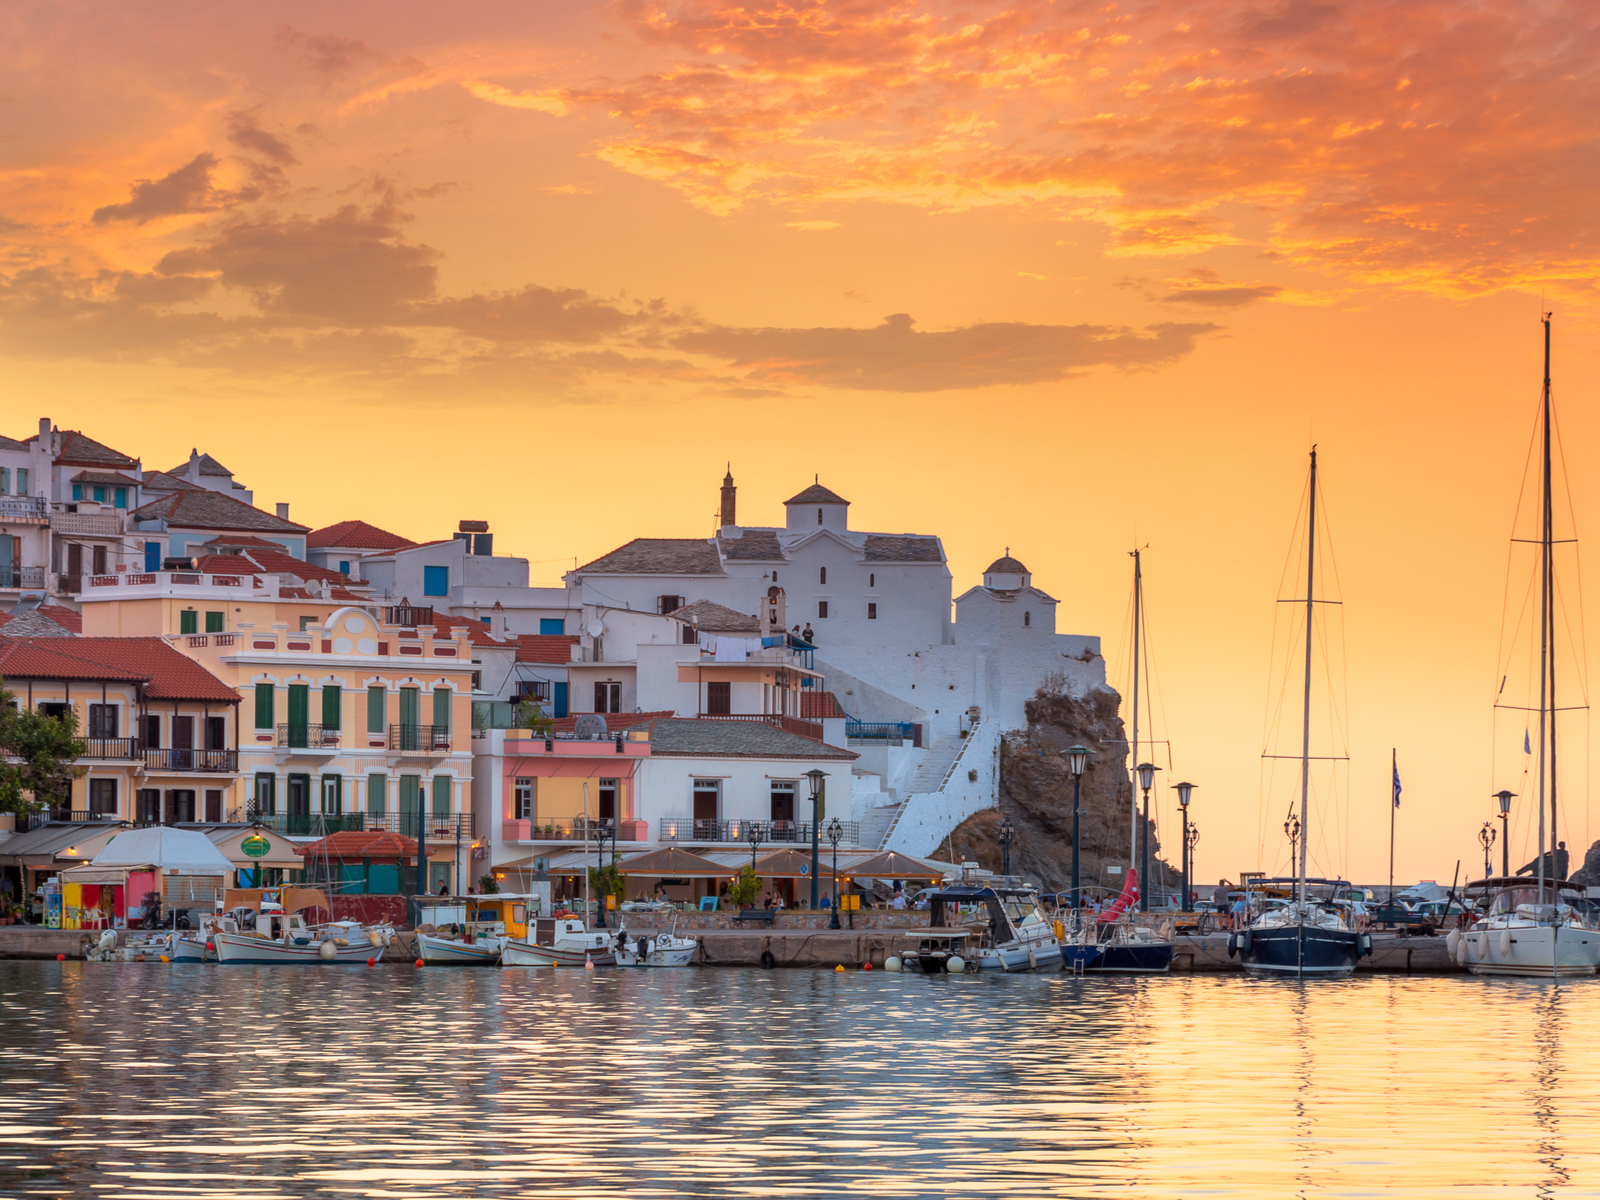 Stunning sunset over the Panagitsa Tou Pirgou Church and other structures beside the bay with docked fishing boats at Skopelos Island, one of the best places to visit in Greece